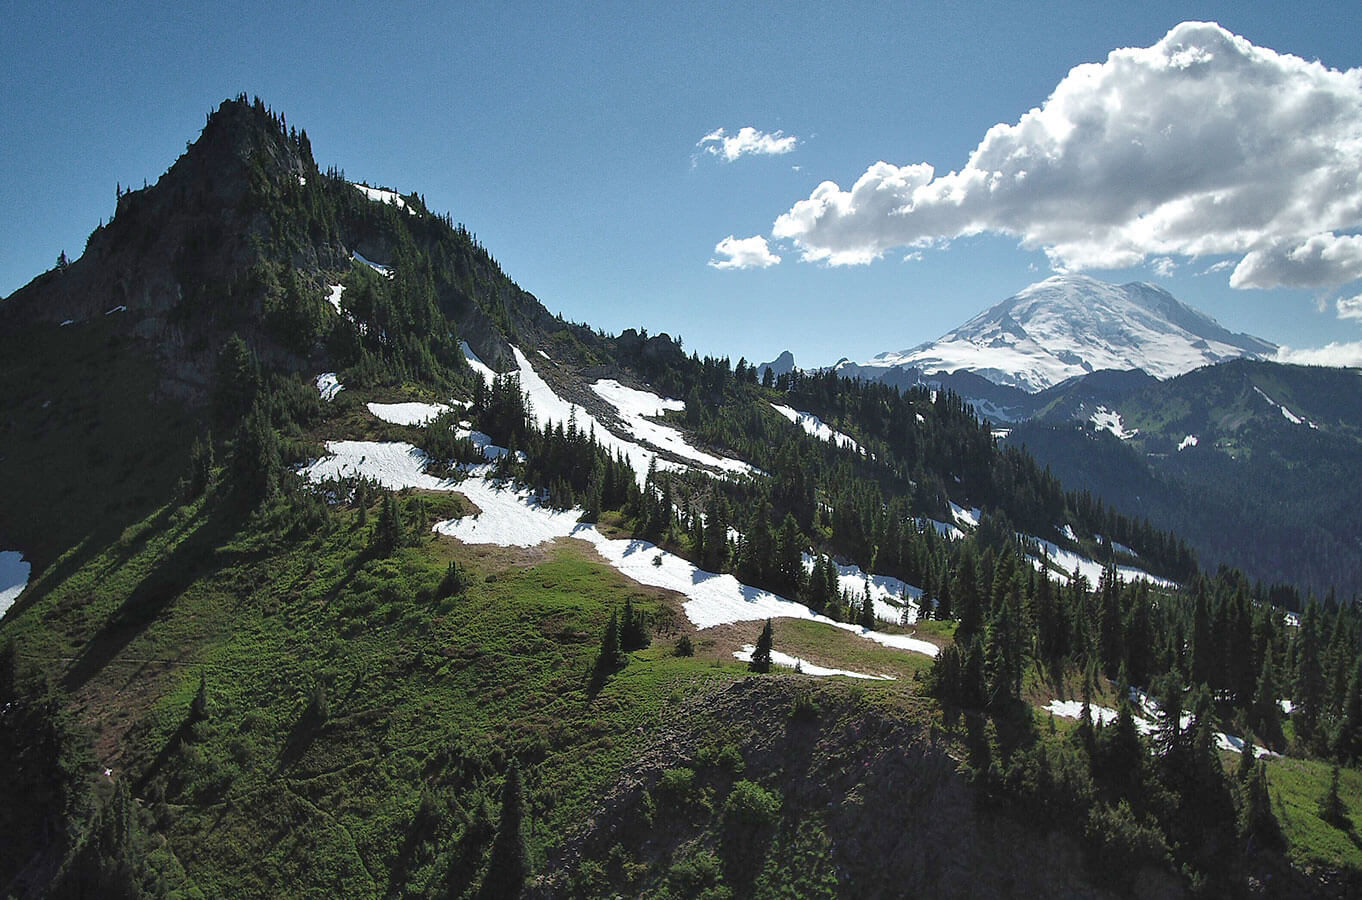 A forested mountain vista view with snow on the north sides of the mountains